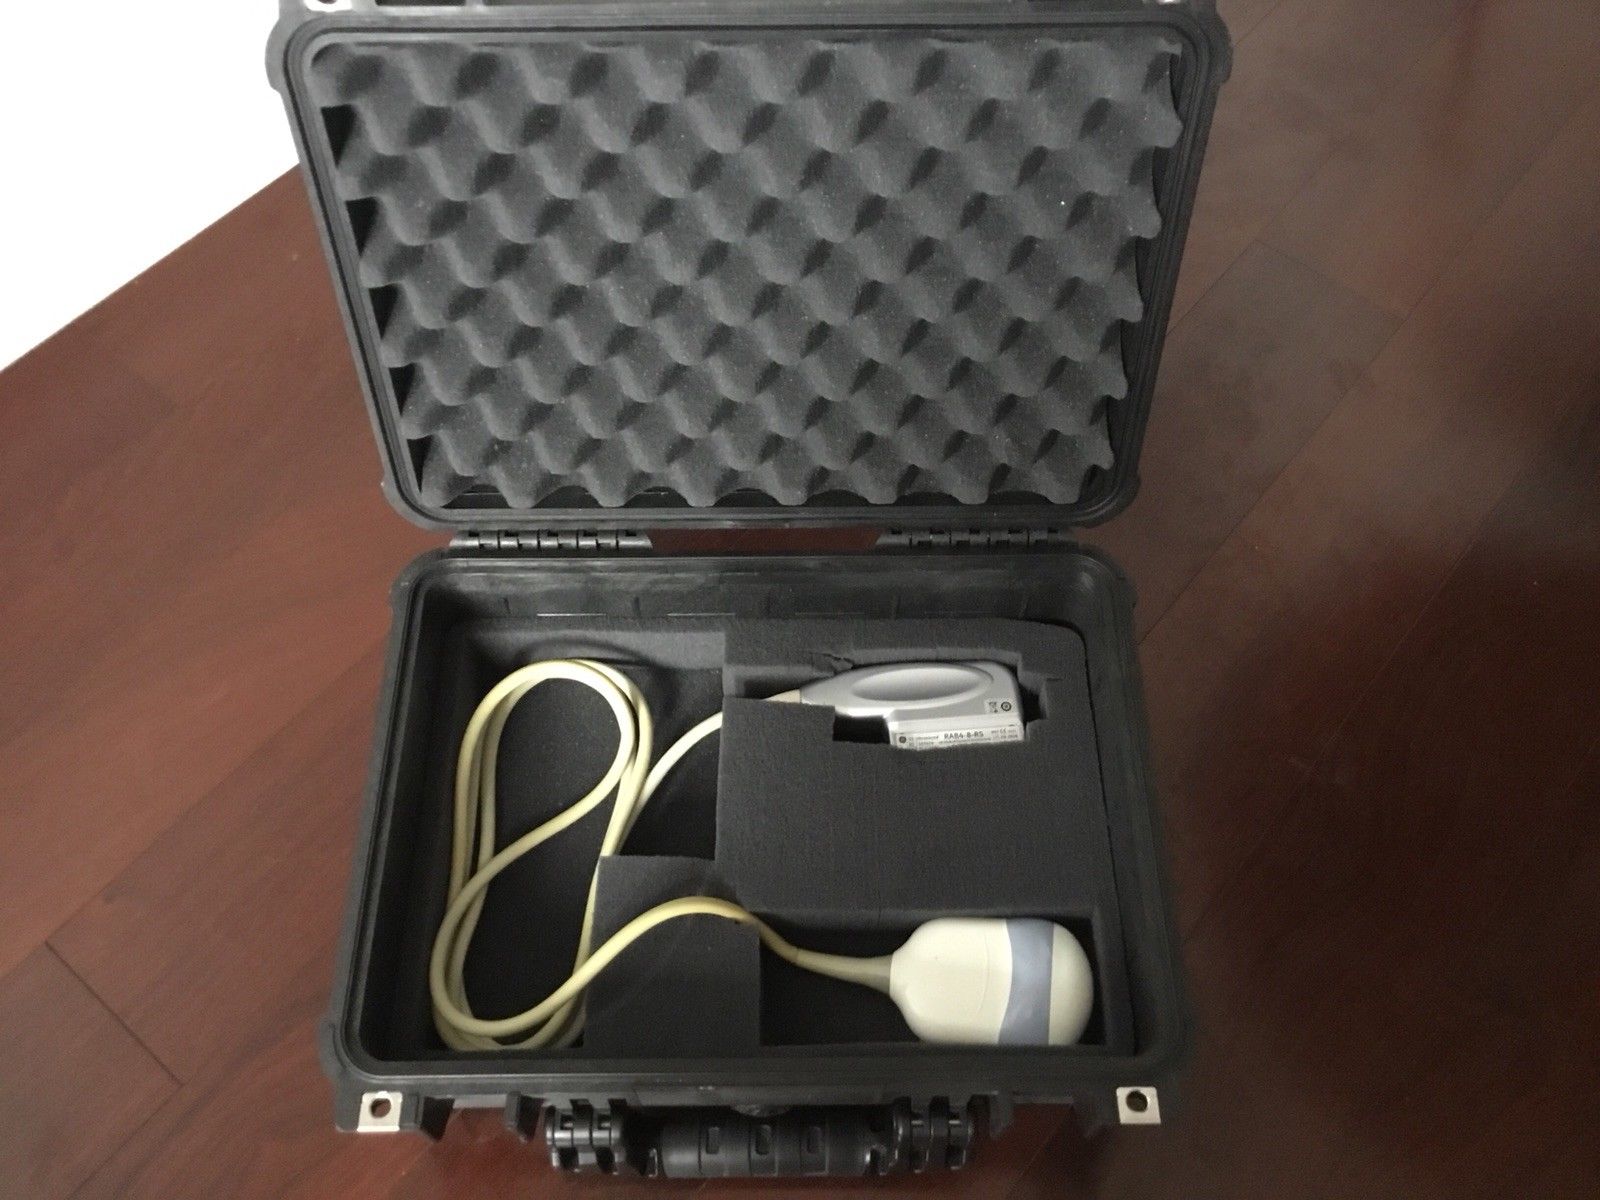 GE Voluson i Portable Ultrasound System and 4D Transducer probe, Protective case DIAGNOSTIC ULTRASOUND MACHINES FOR SALE